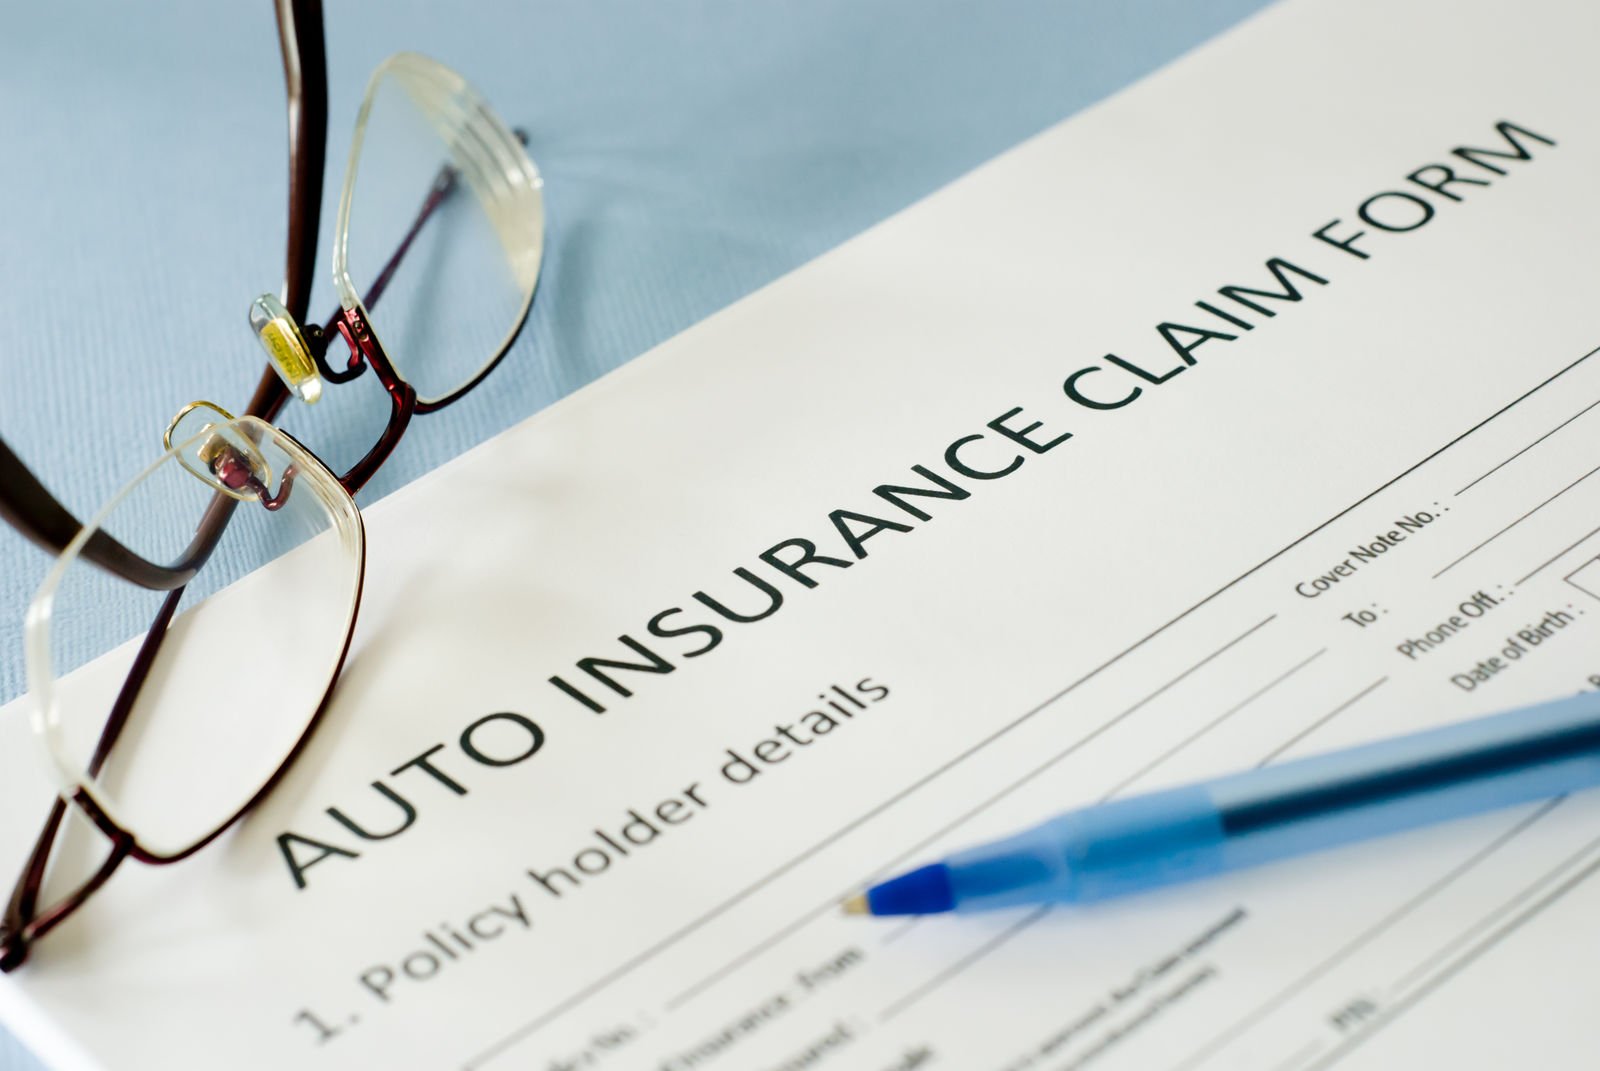 How do you file a claim on someone else’s car insurance?